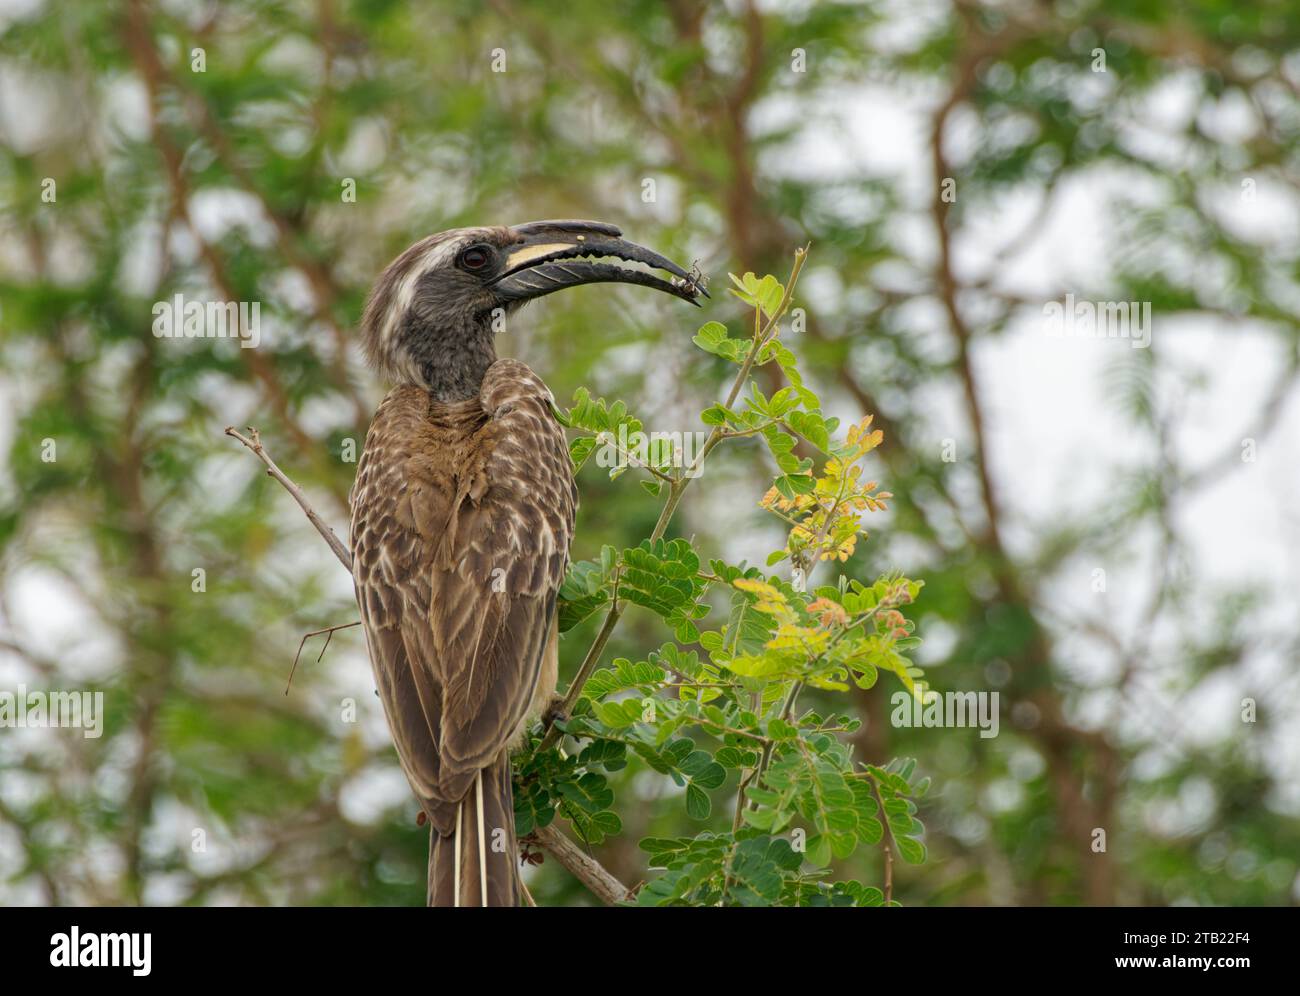 An African Gray Hornbill feeds on insects Stock Photo